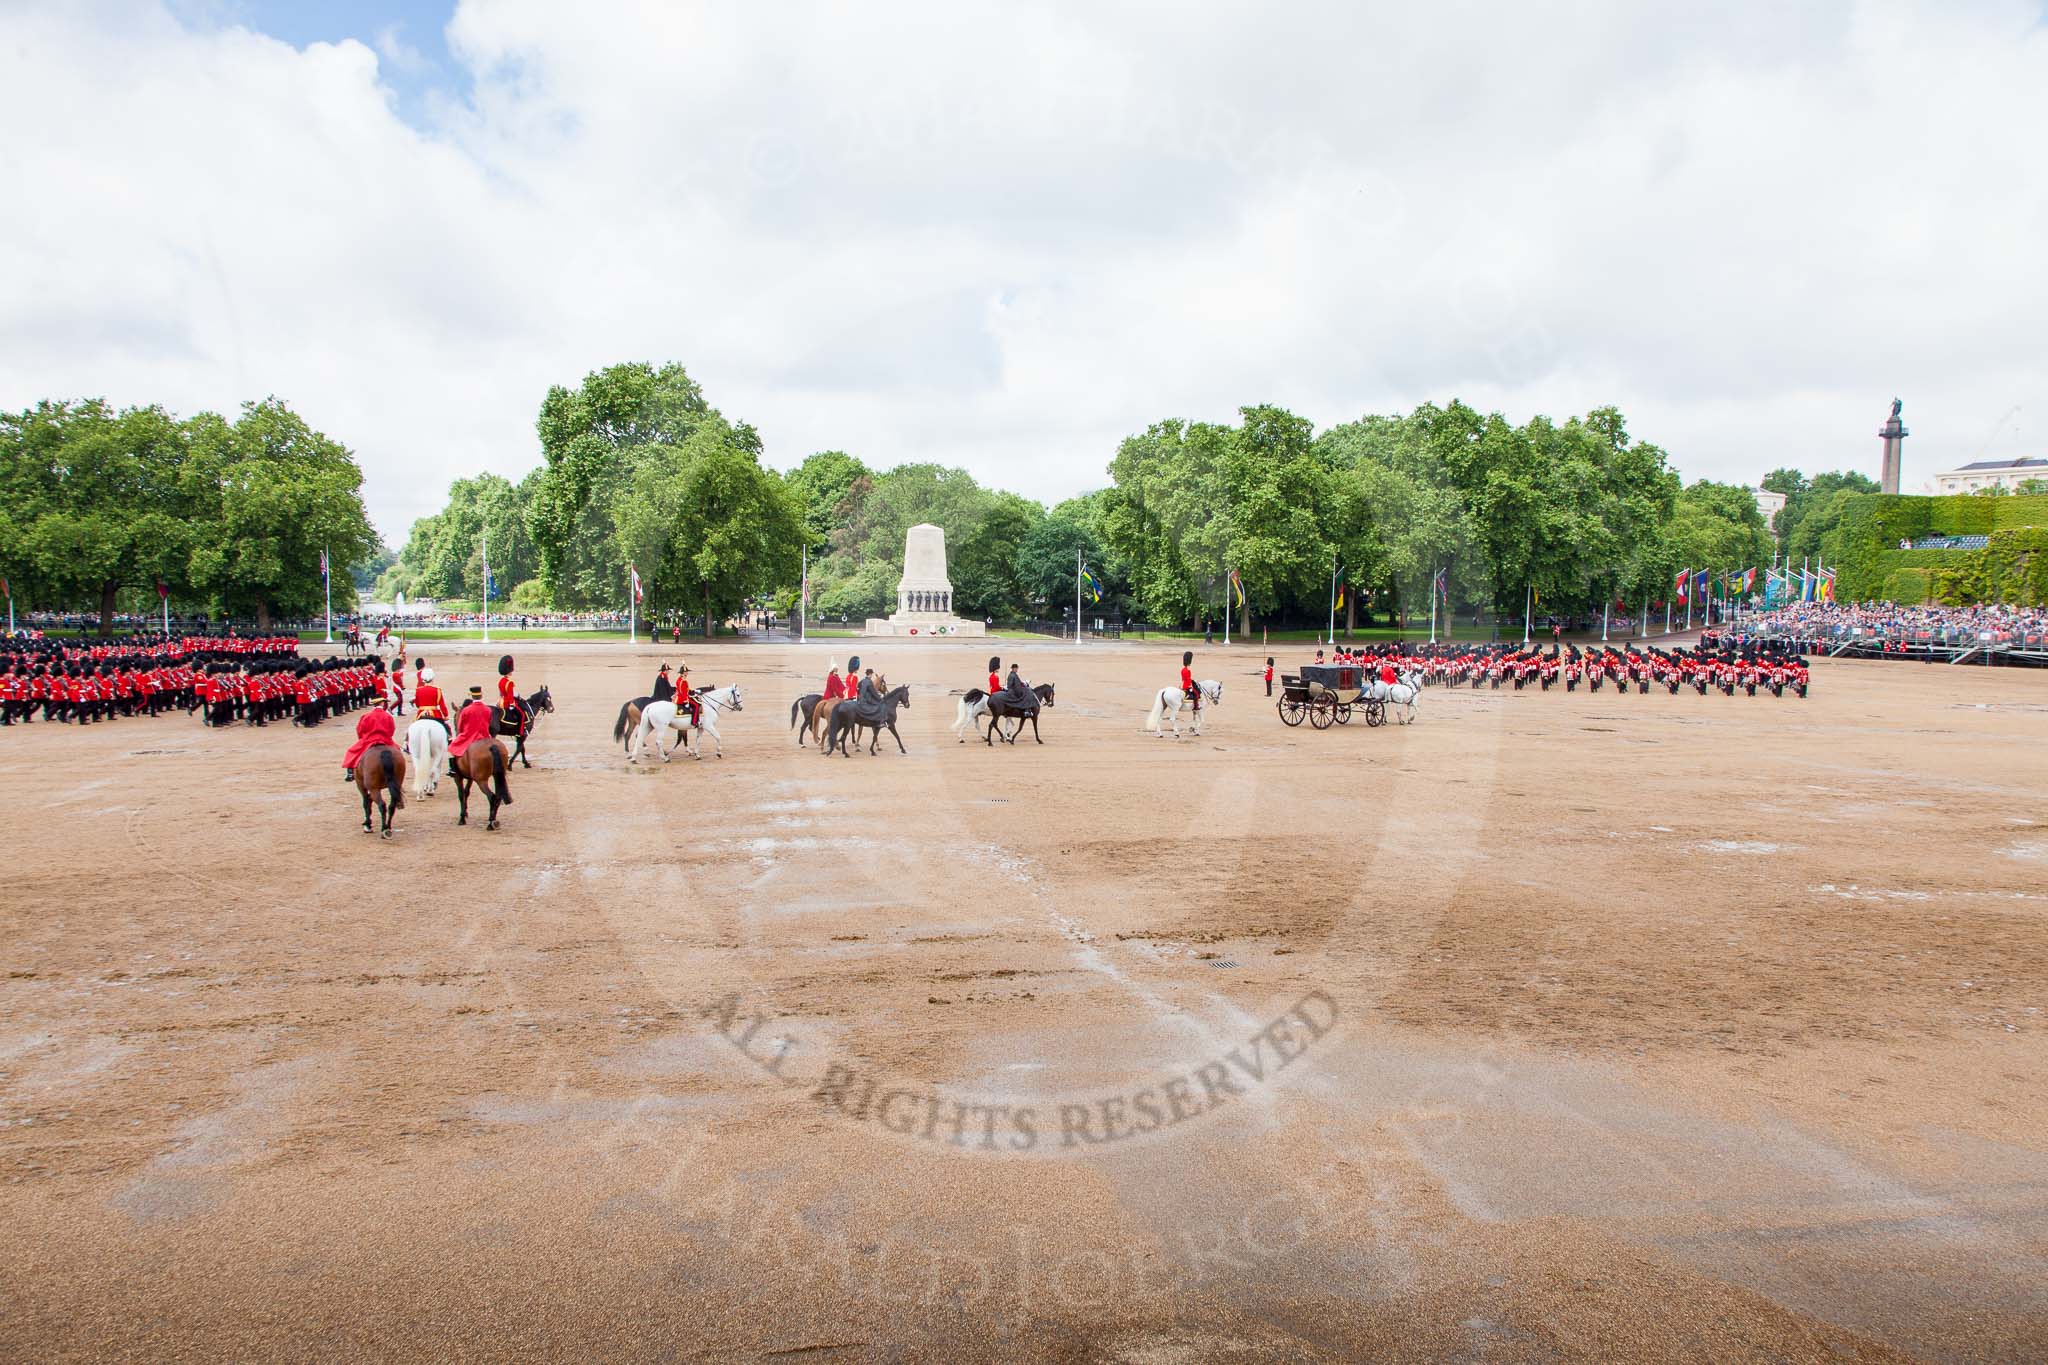 The Colonel's Review 2014.
Horse Guards Parade, Westminster,
London,

United Kingdom,
on 07 June 2014 at 12:09, image #721